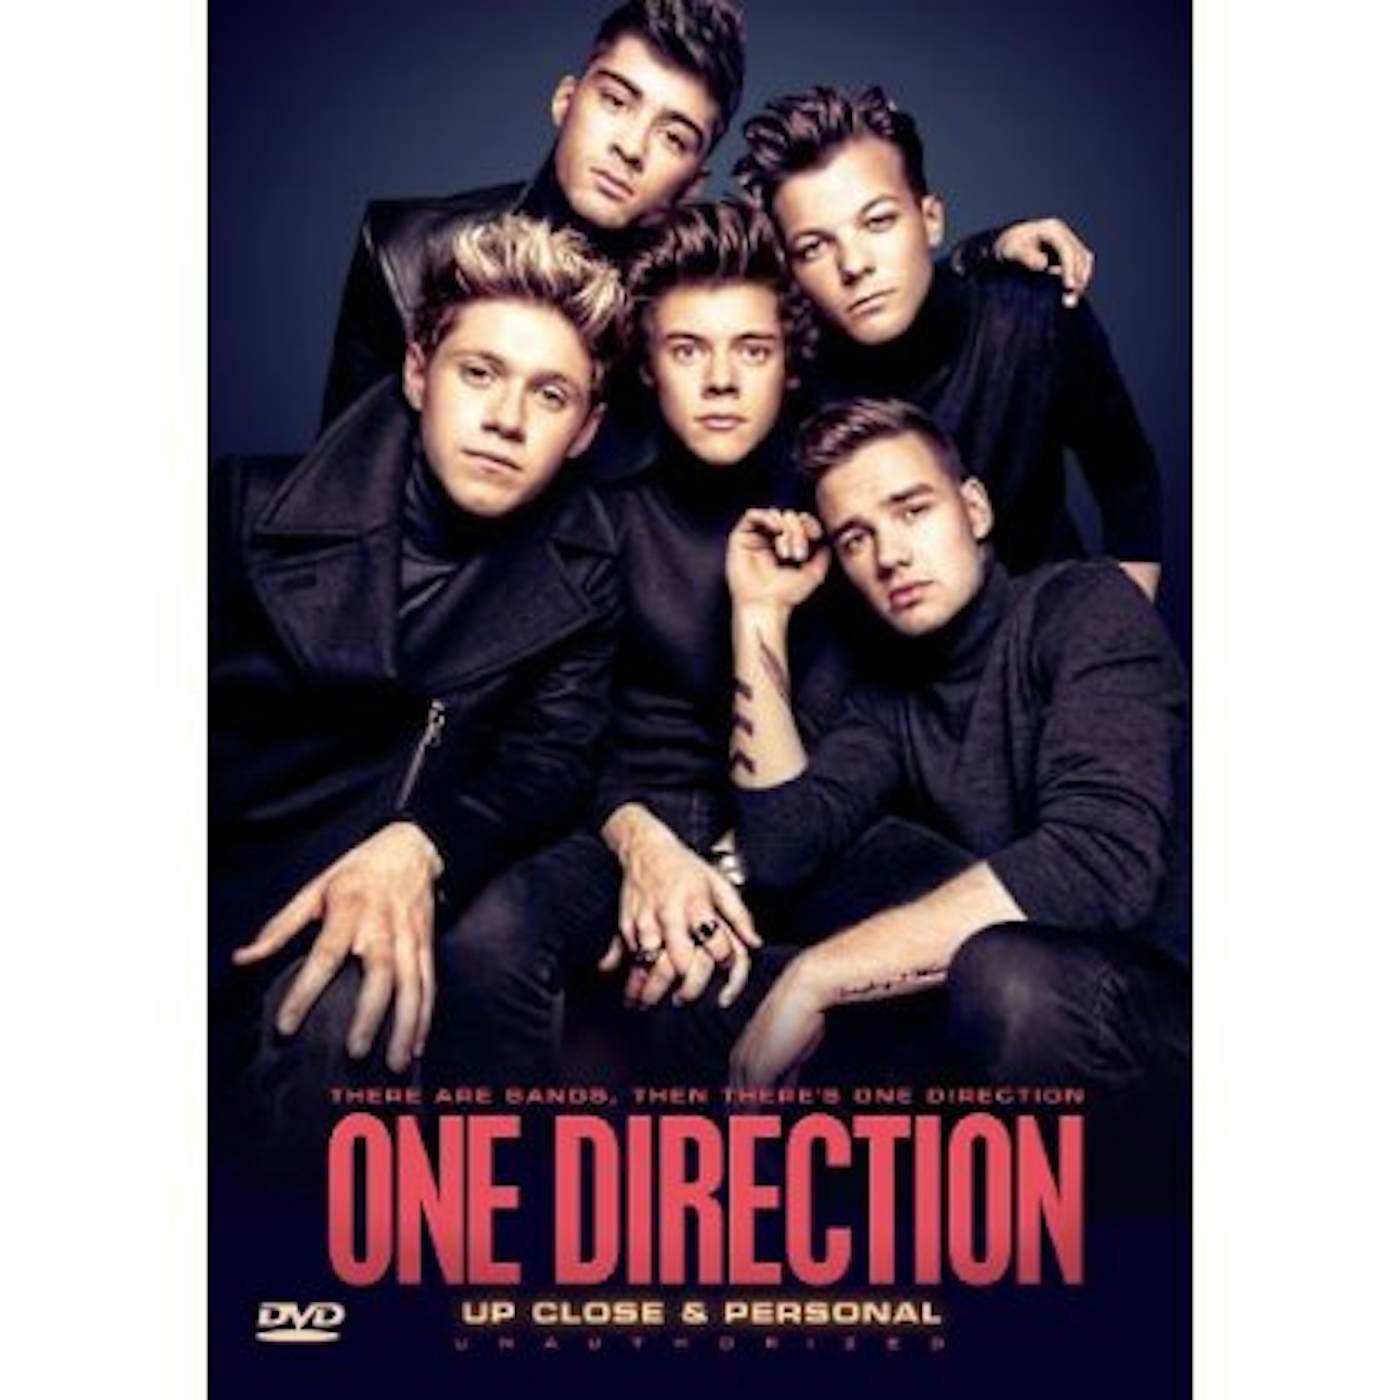 One Direction UP CLOSE & PERSONAL DVD